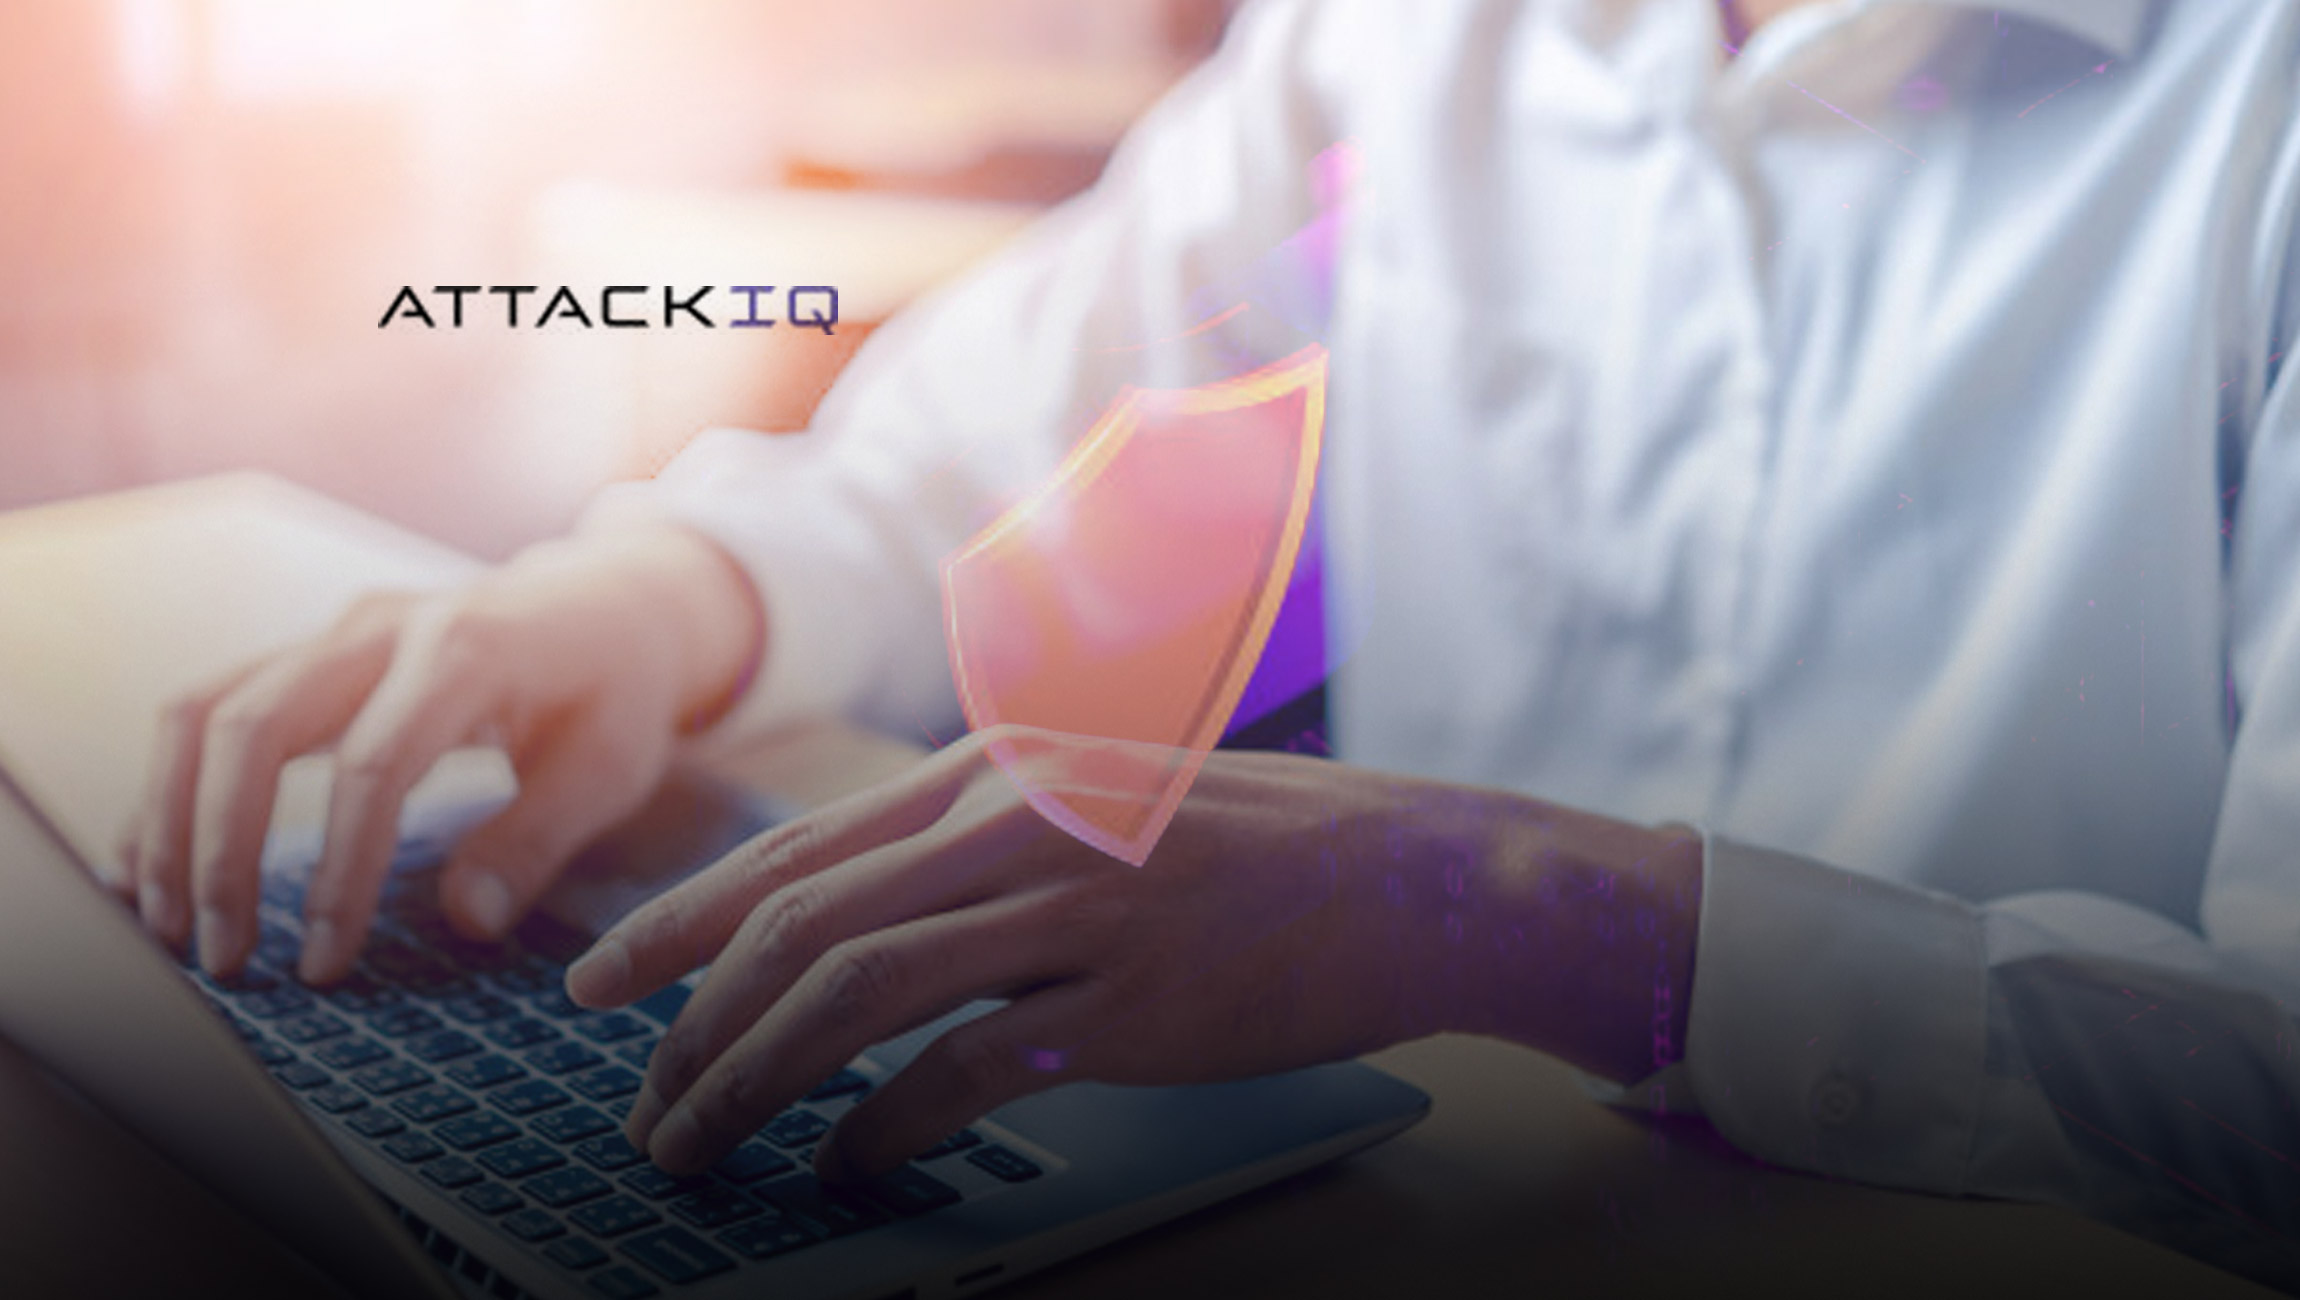 AttackIQ Introduces New Partner Academy To Help Channel Partners Around the World Accelerate Adoption of Threat-Informed Defense Practice